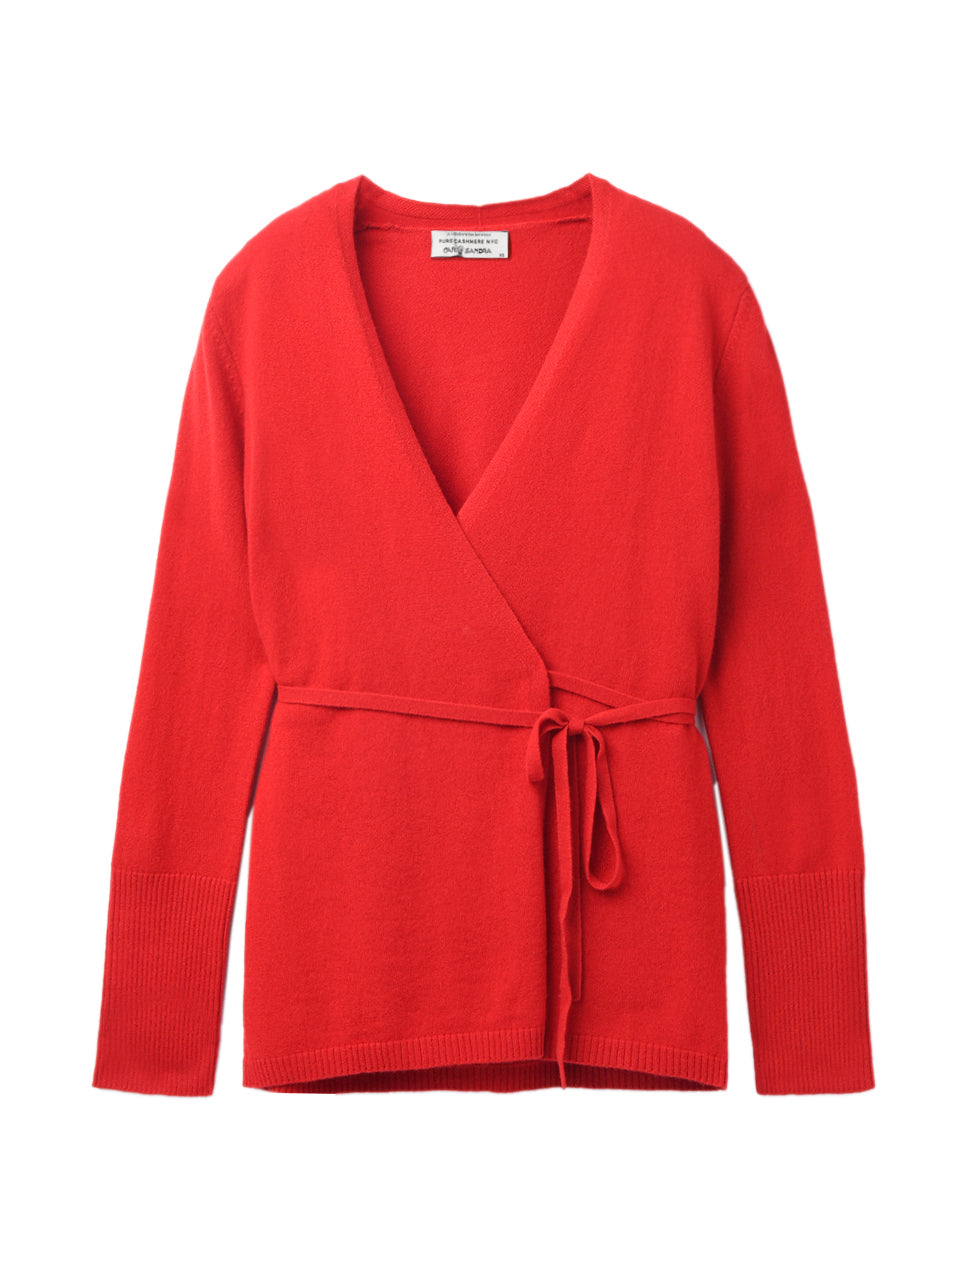 Wrap Cardigan in Lipstick Red